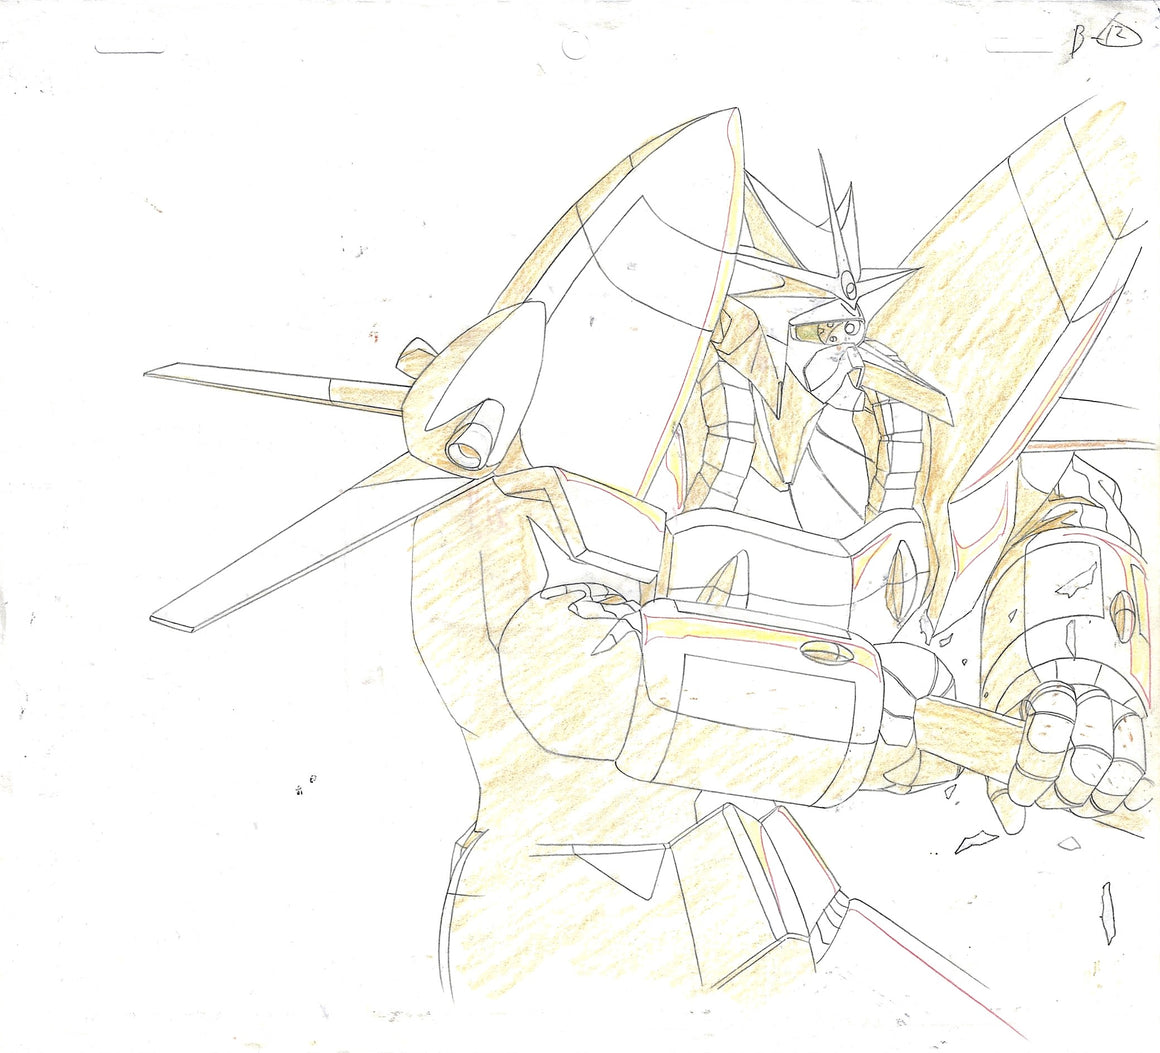 Gunbuster - Gunbuster catching the space monster - 1-layer Production Cel w/ Douga & Printed Background